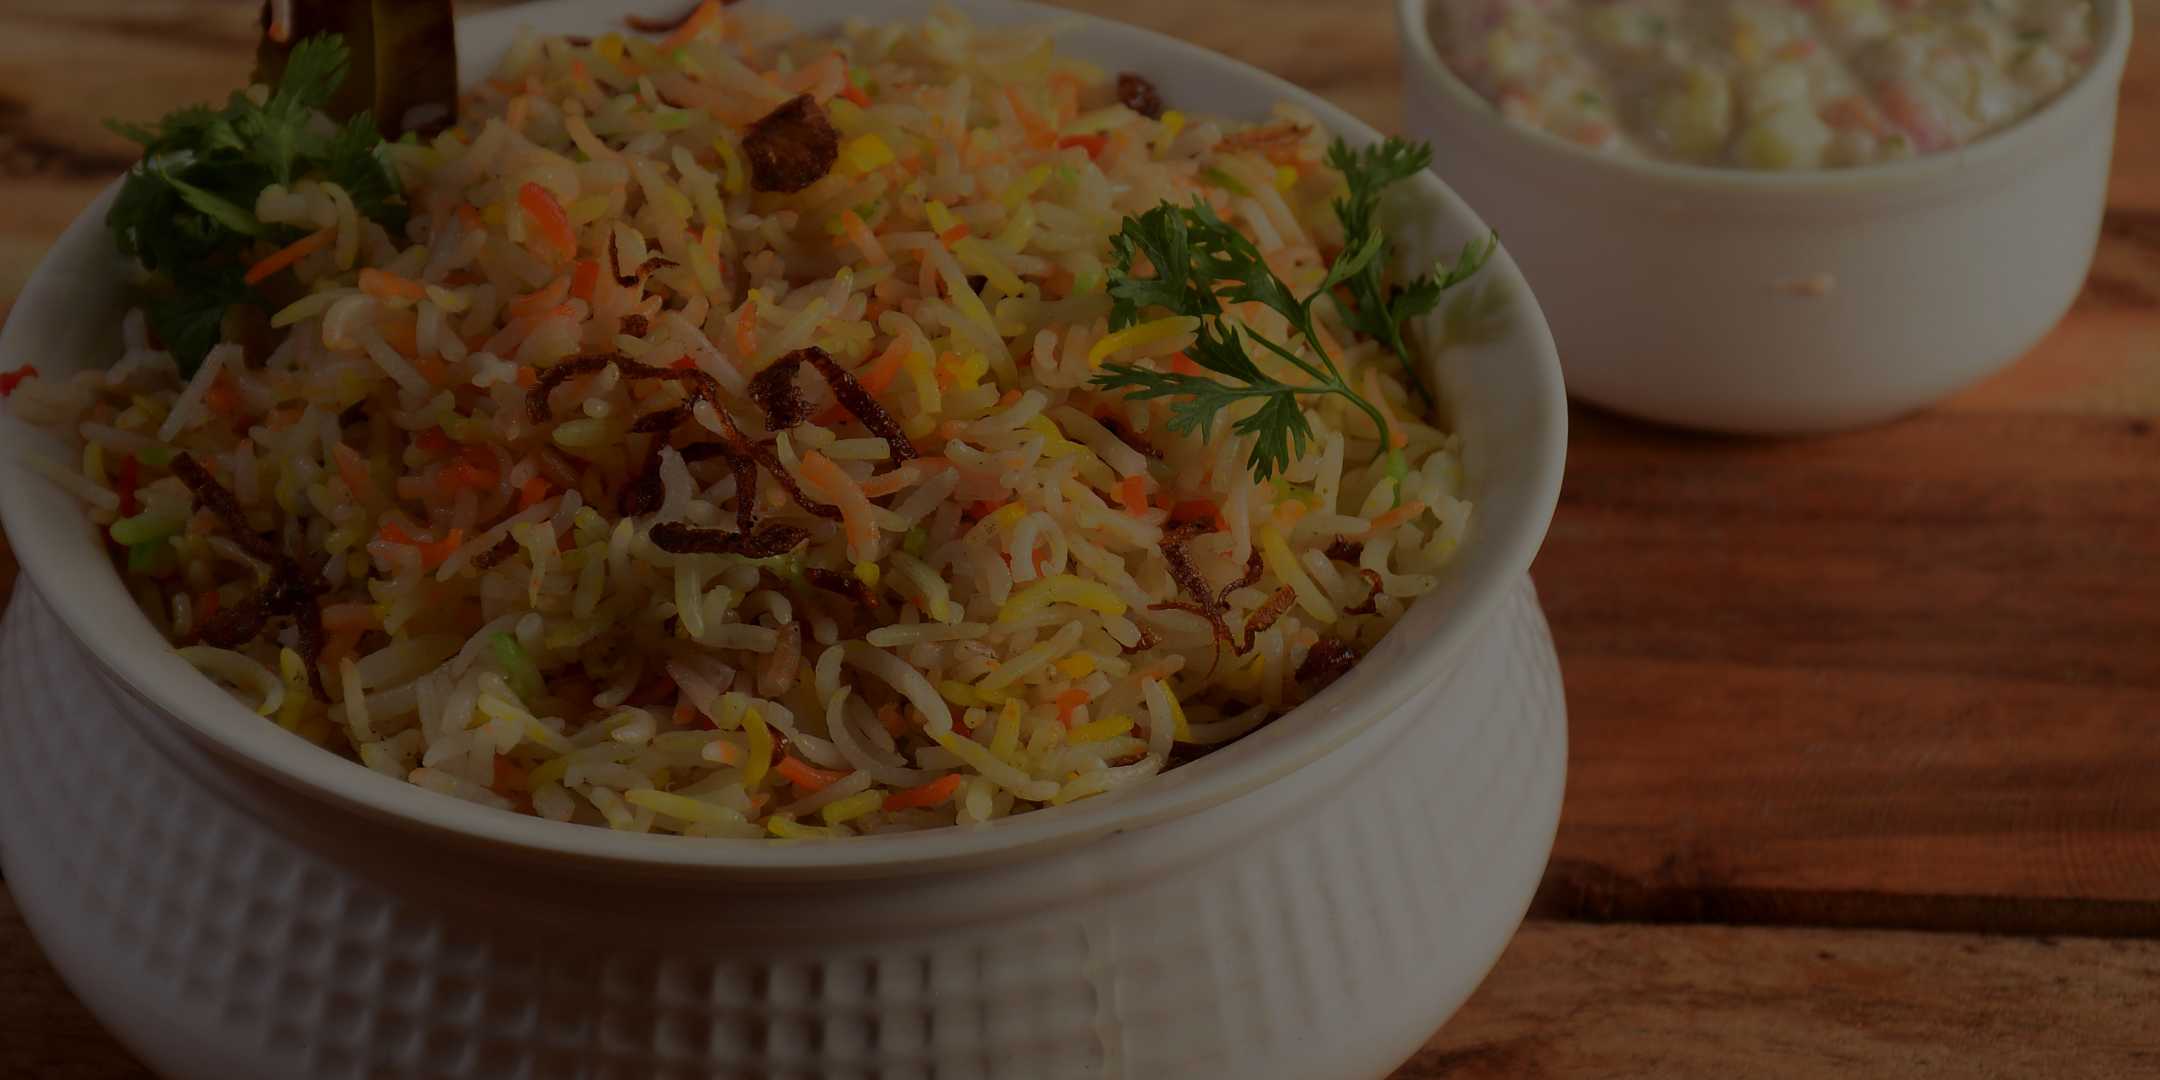 Cover Image - Veg Biryani: In search of lost respect and identity